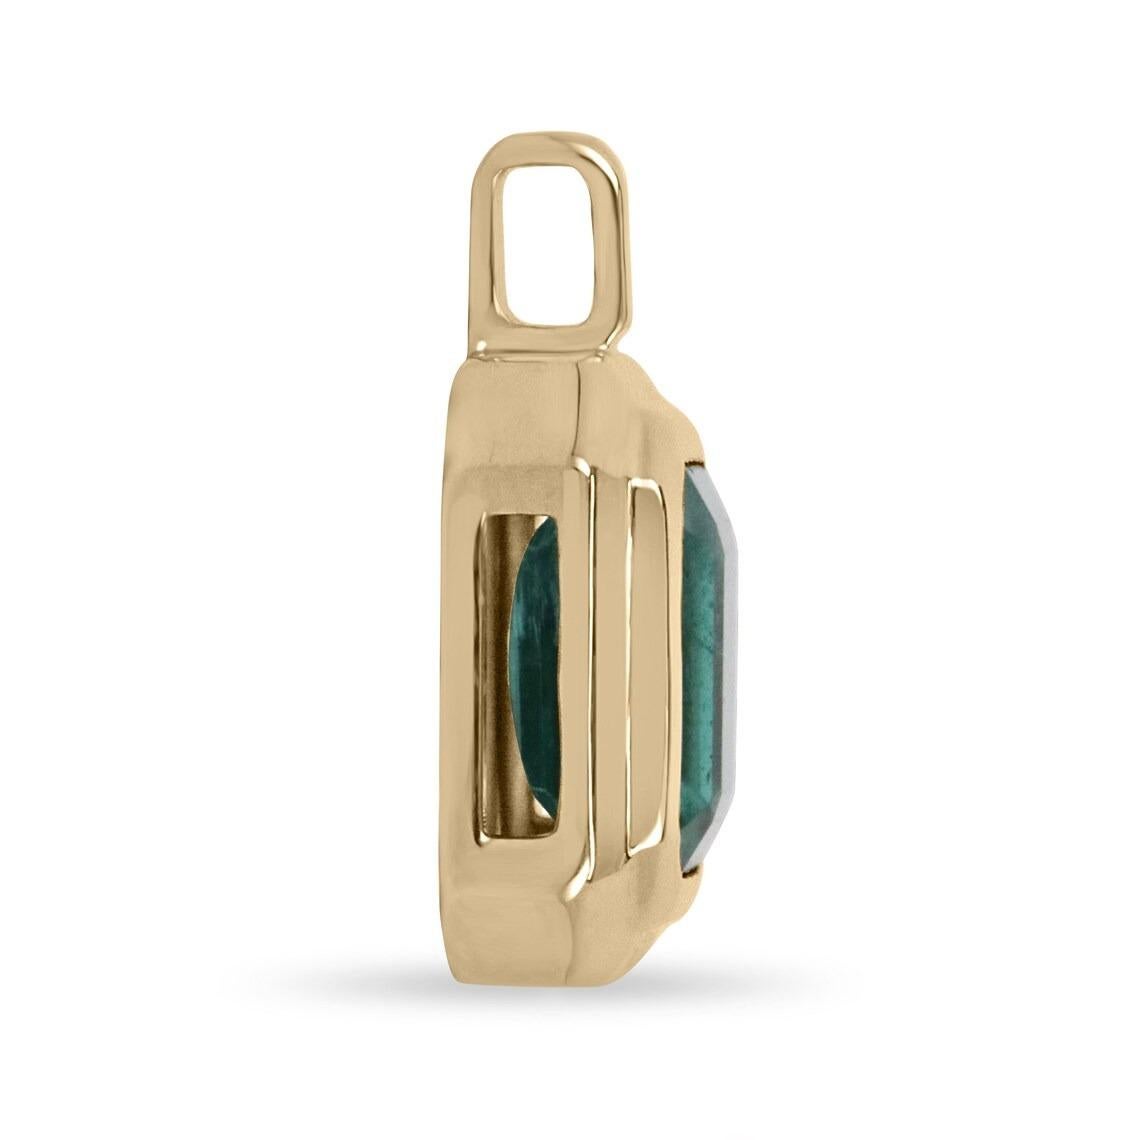 A bold 2.65-carat natural emerald solitaire, double bezel solid 14K hand-crafted pendant. This is quite an alluring piece with an incredible emerald as the center of attention. The clarity of the stone is absolutely incredible, with very minor